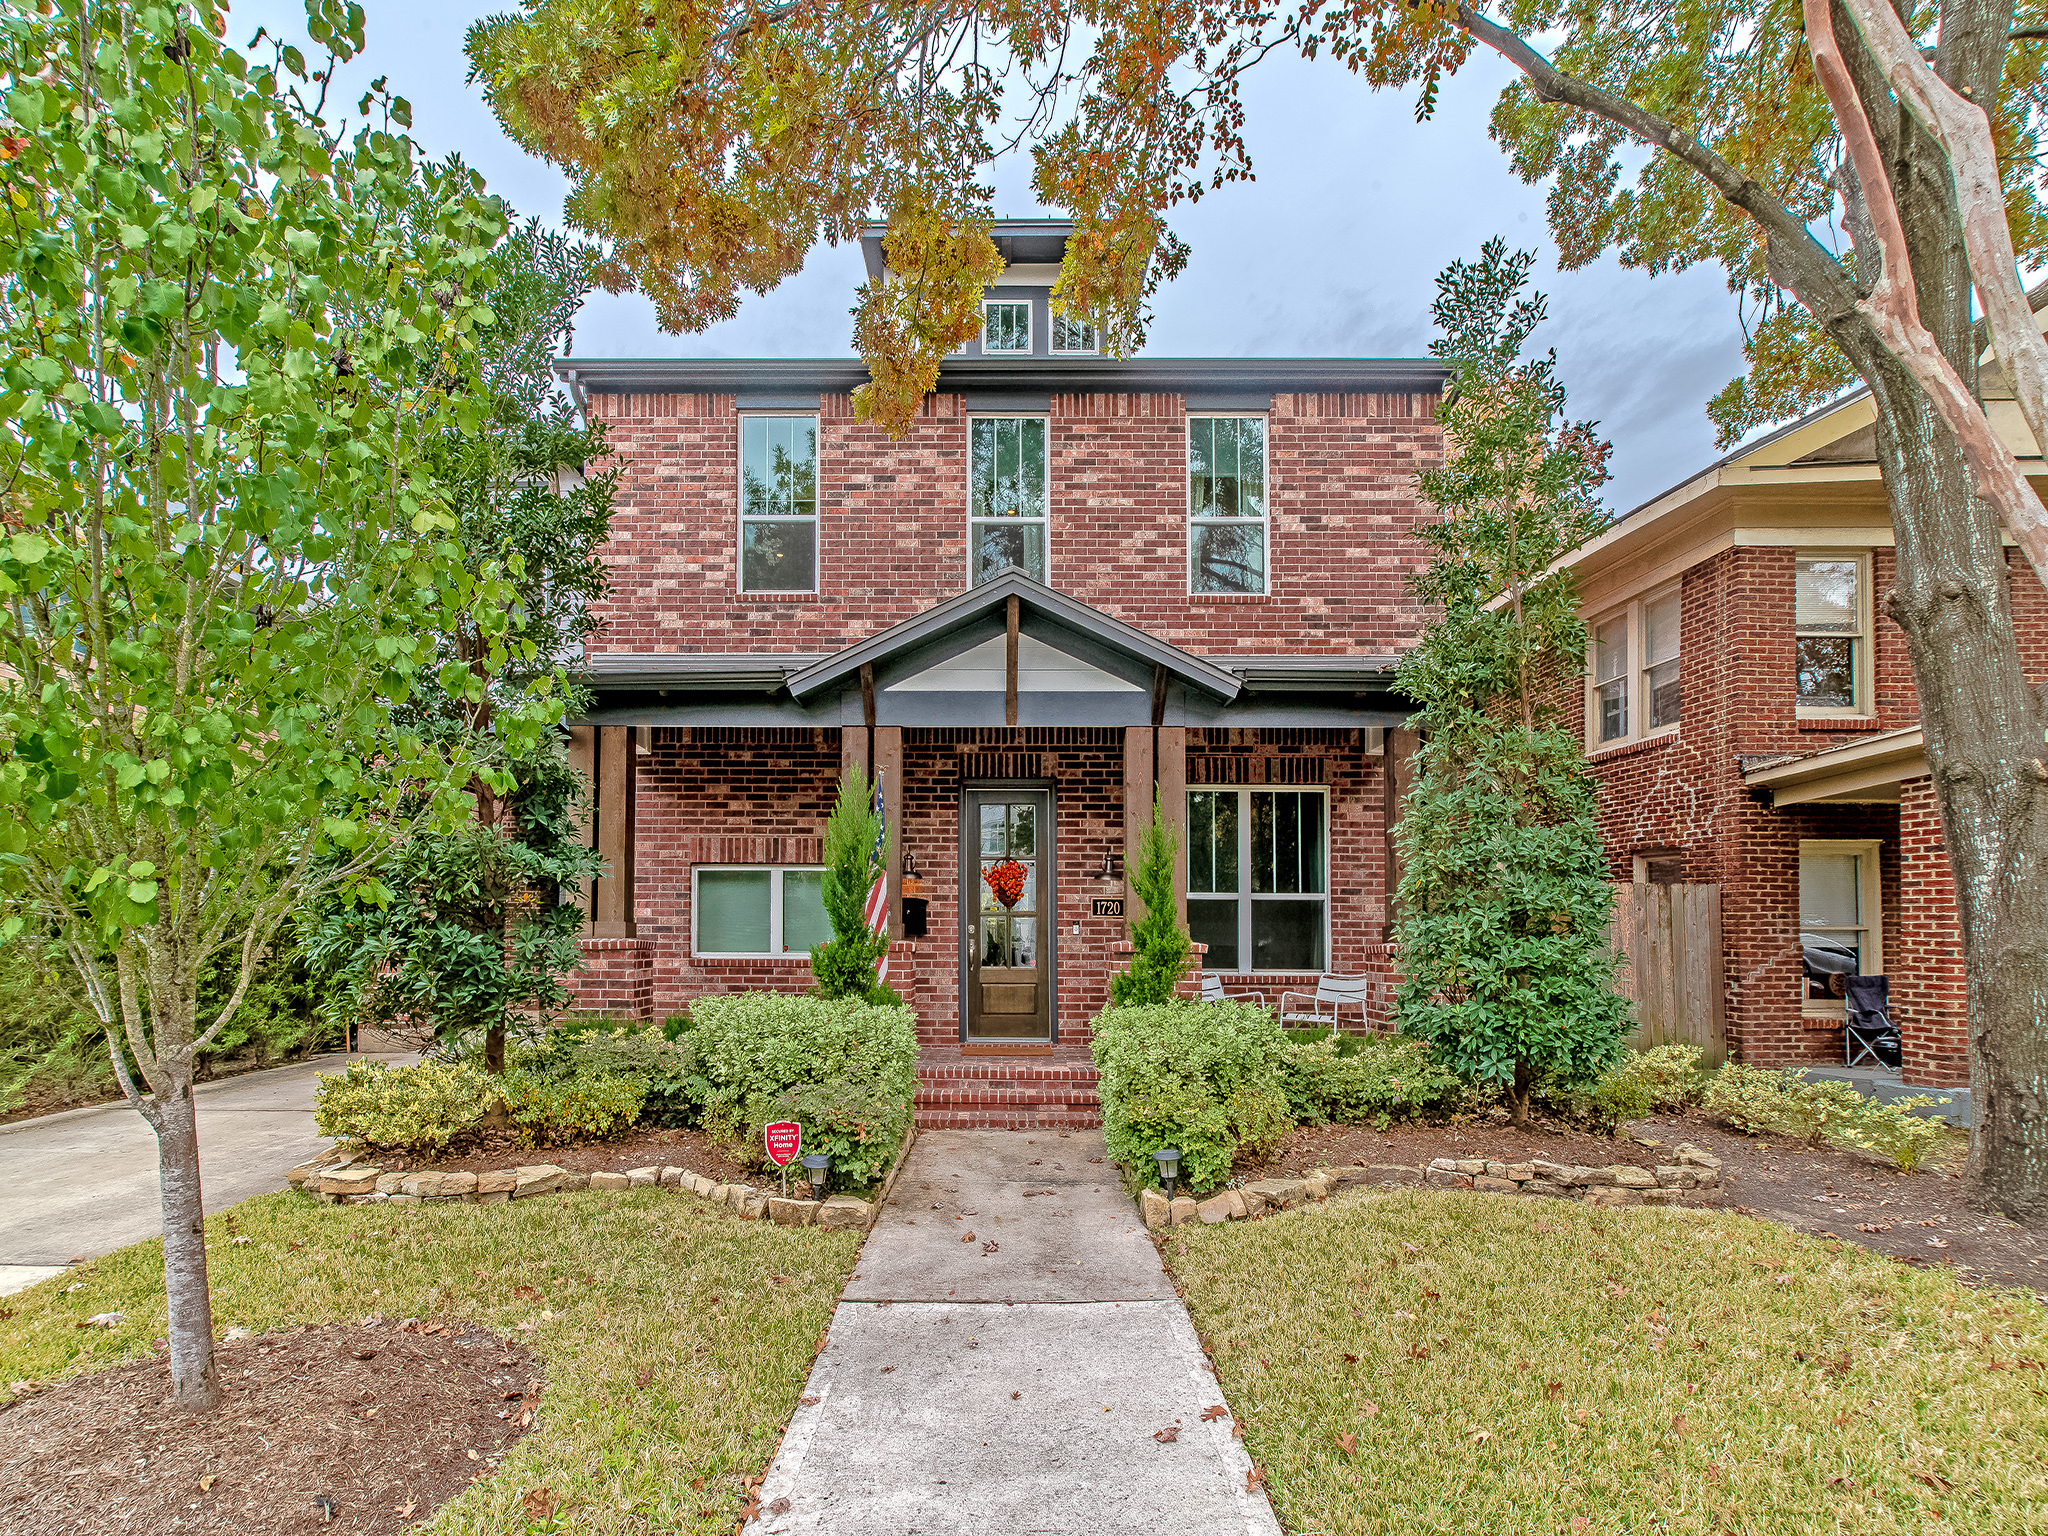  A beautiful craftsman style home built in 2016. Ideally located within walking distance of the Montrose HEB, Trader Joes, Menil Collection and many other Upper Kirby Shops and Eateries. 